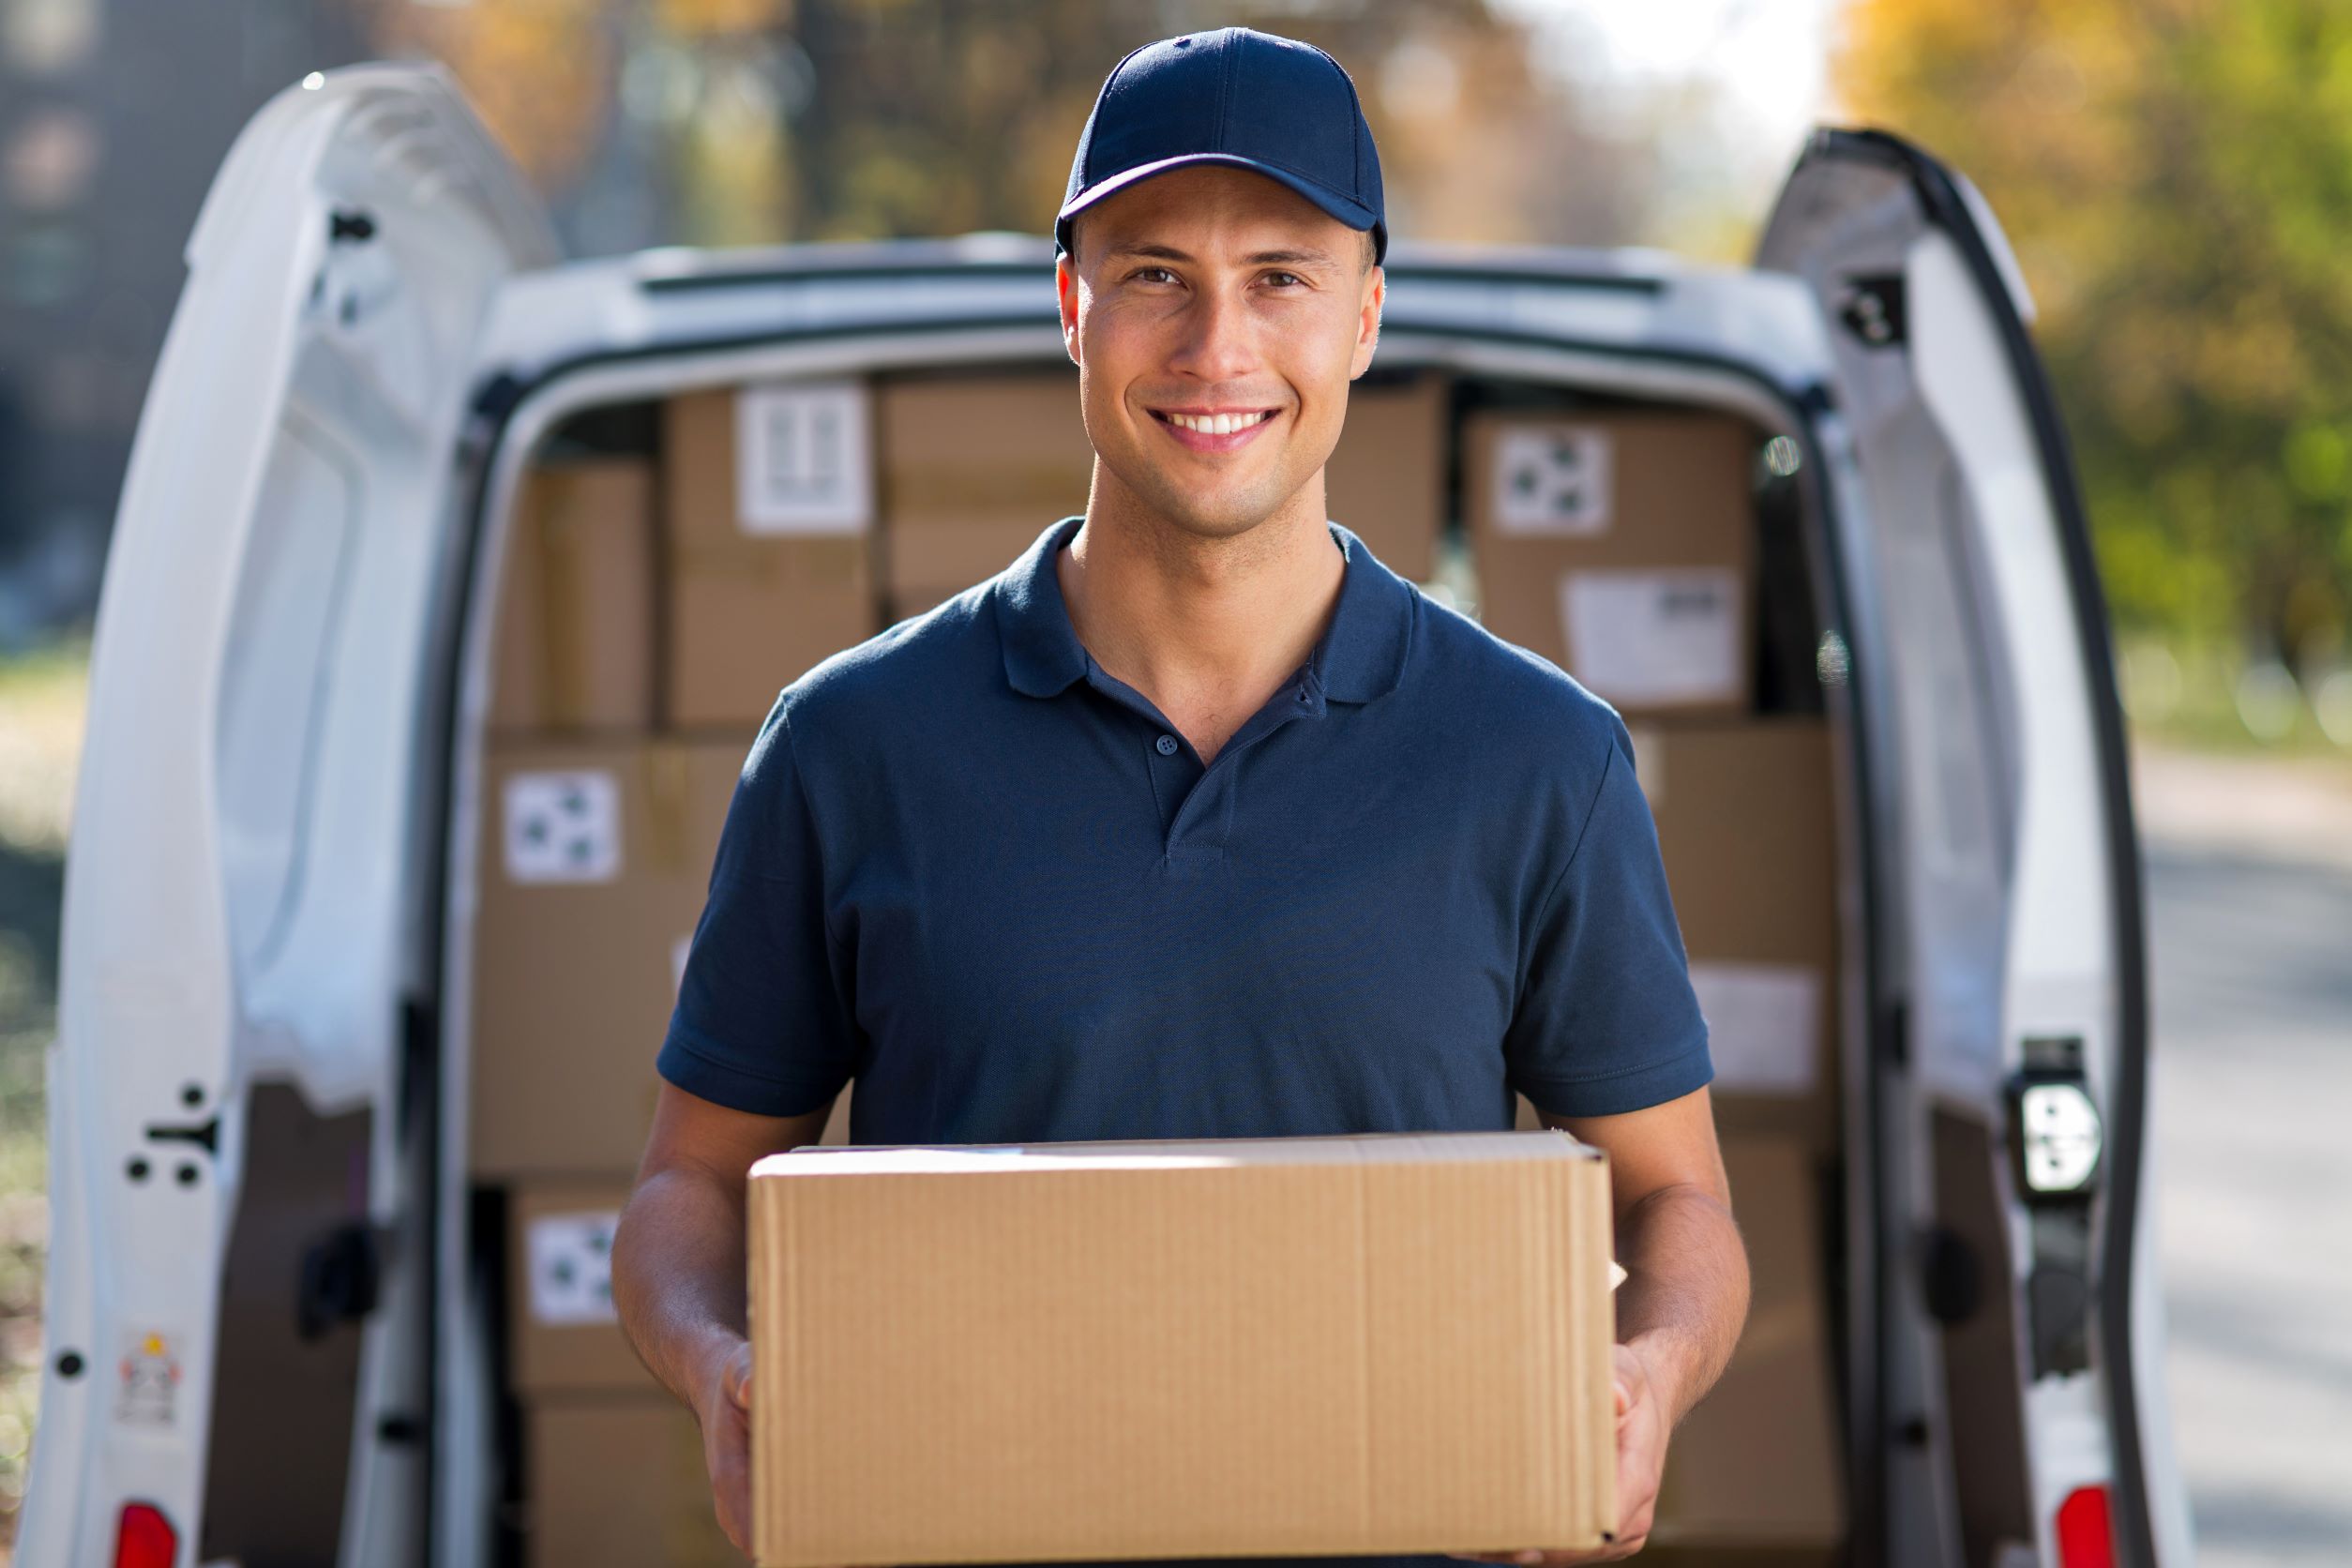 How To Choose The Best Vehicle For Delivery Drivers